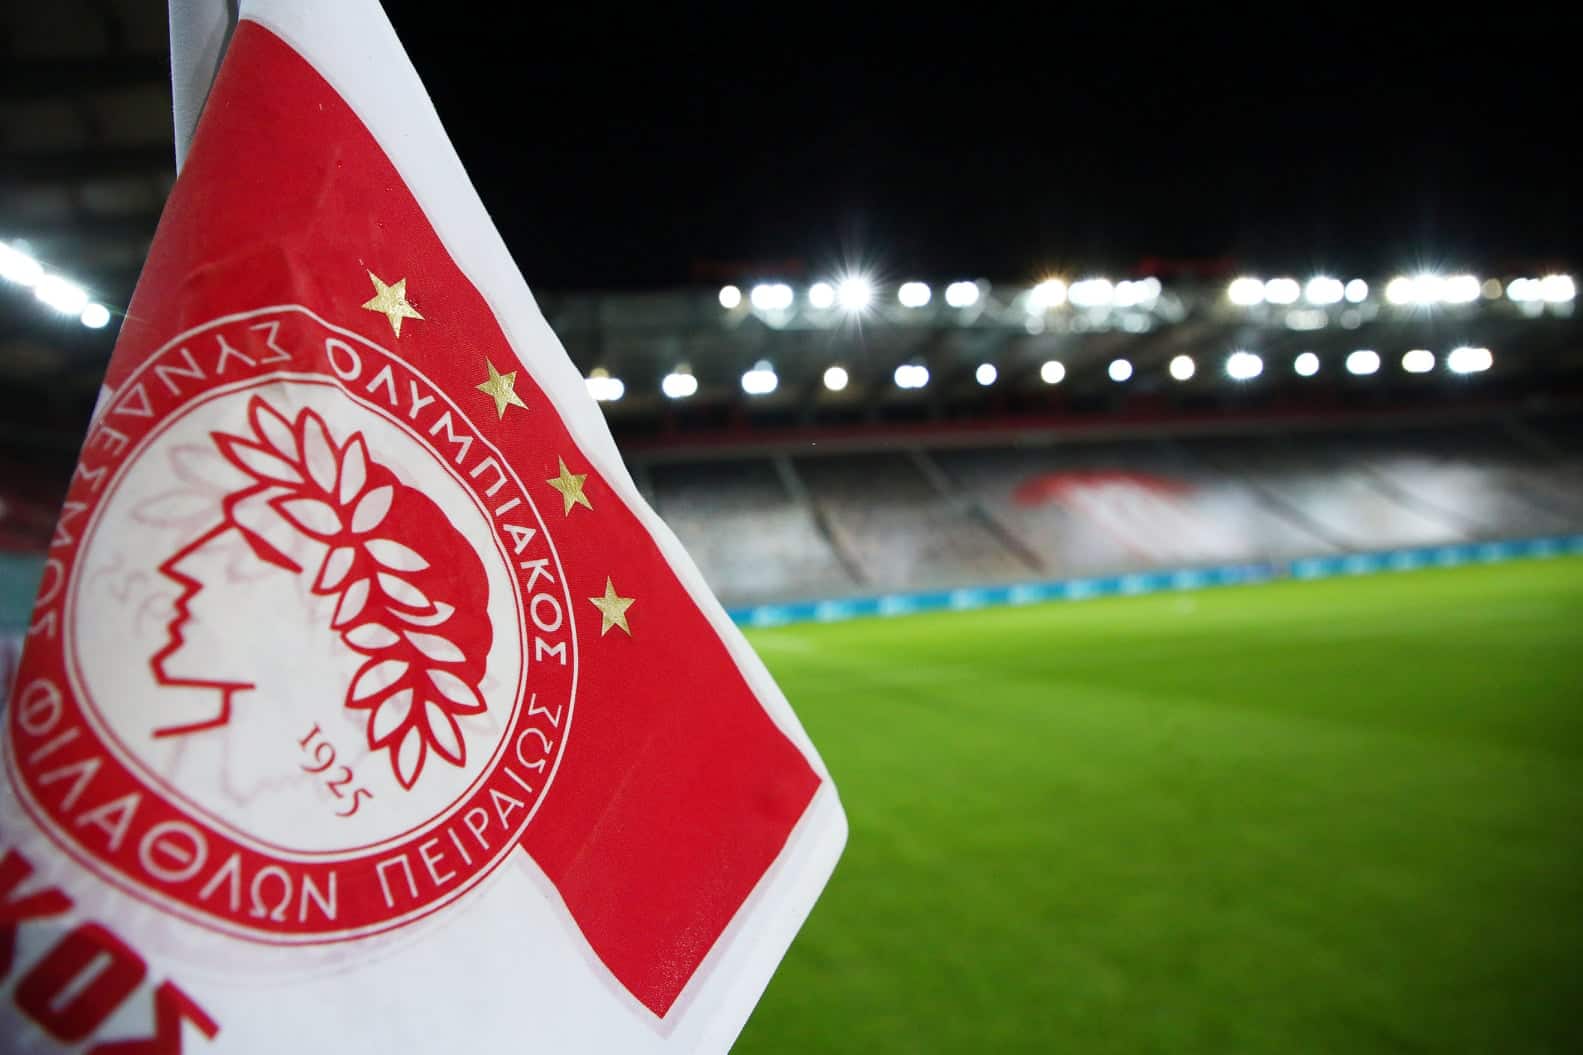 On this day in 1925, Olympiacos FC was founded